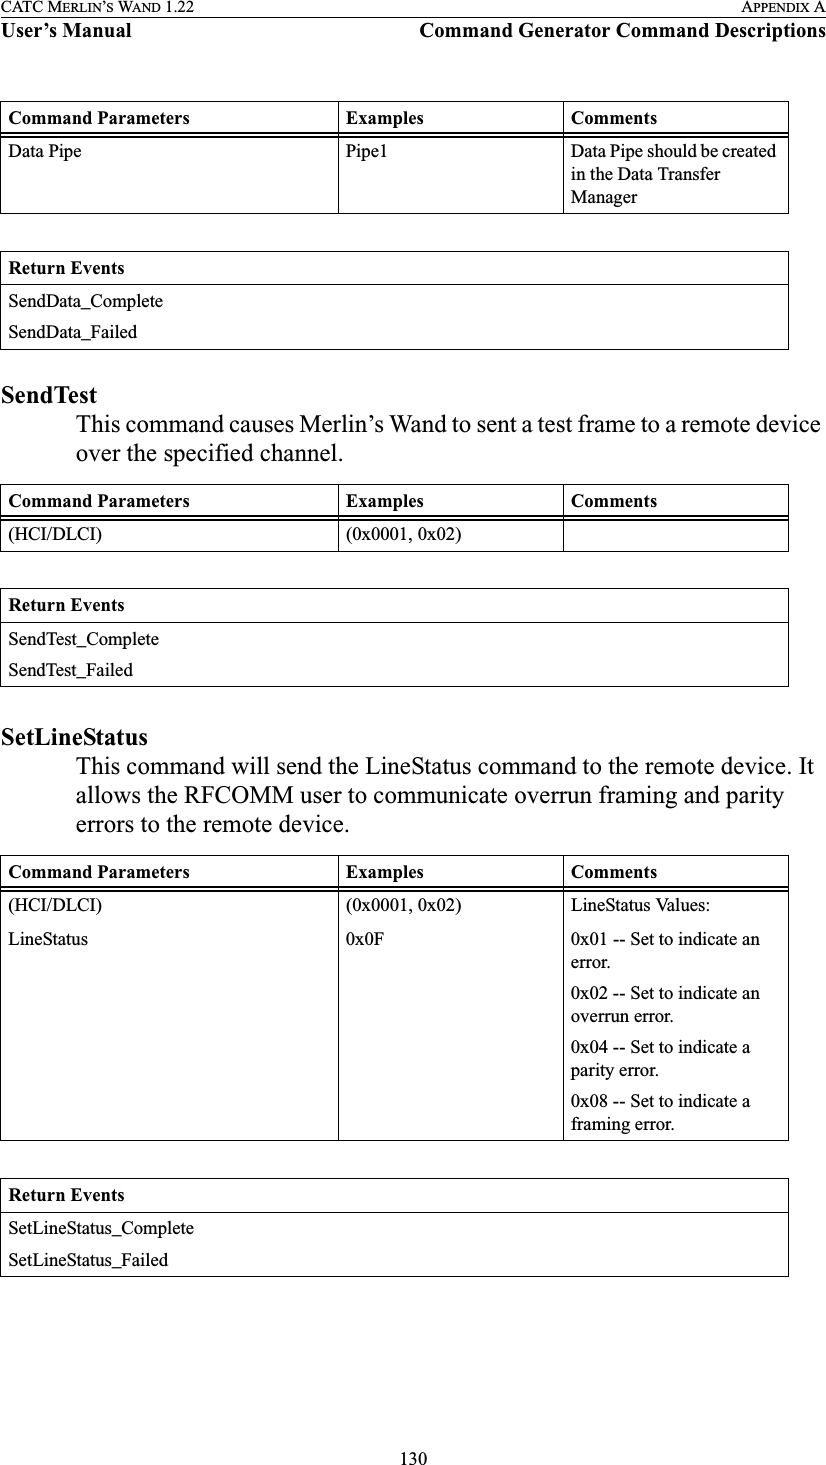 130CATC MERLIN’S WAND 1.22 APPENDIX AUser’s Manual Command Generator Command DescriptionsSendTestThis command causes Merlin’s Wand to sent a test frame to a remote device over the specified channel.SetLineStatusThis command will send the LineStatus command to the remote device. It allows the RFCOMM user to communicate overrun framing and parity errors to the remote device.Data Pipe Pipe1 Data Pipe should be created in the Data Transfer ManagerReturn EventsSendData_CompleteSendData_FailedCommand Parameters Examples Comments(HCI/DLCI) (0x0001, 0x02)Return EventsSendTest_CompleteSendTest_FailedCommand Parameters Examples Comments(HCI/DLCI) (0x0001, 0x02) LineStatus Values:LineStatus 0x0F 0x01 -- Set to indicate an error.0x02 -- Set to indicate an overrun error.0x04 -- Set to indicate a parity error.0x08 -- Set to indicate a framing error.Return EventsSetLineStatus_CompleteSetLineStatus_FailedCommand Parameters Examples Comments